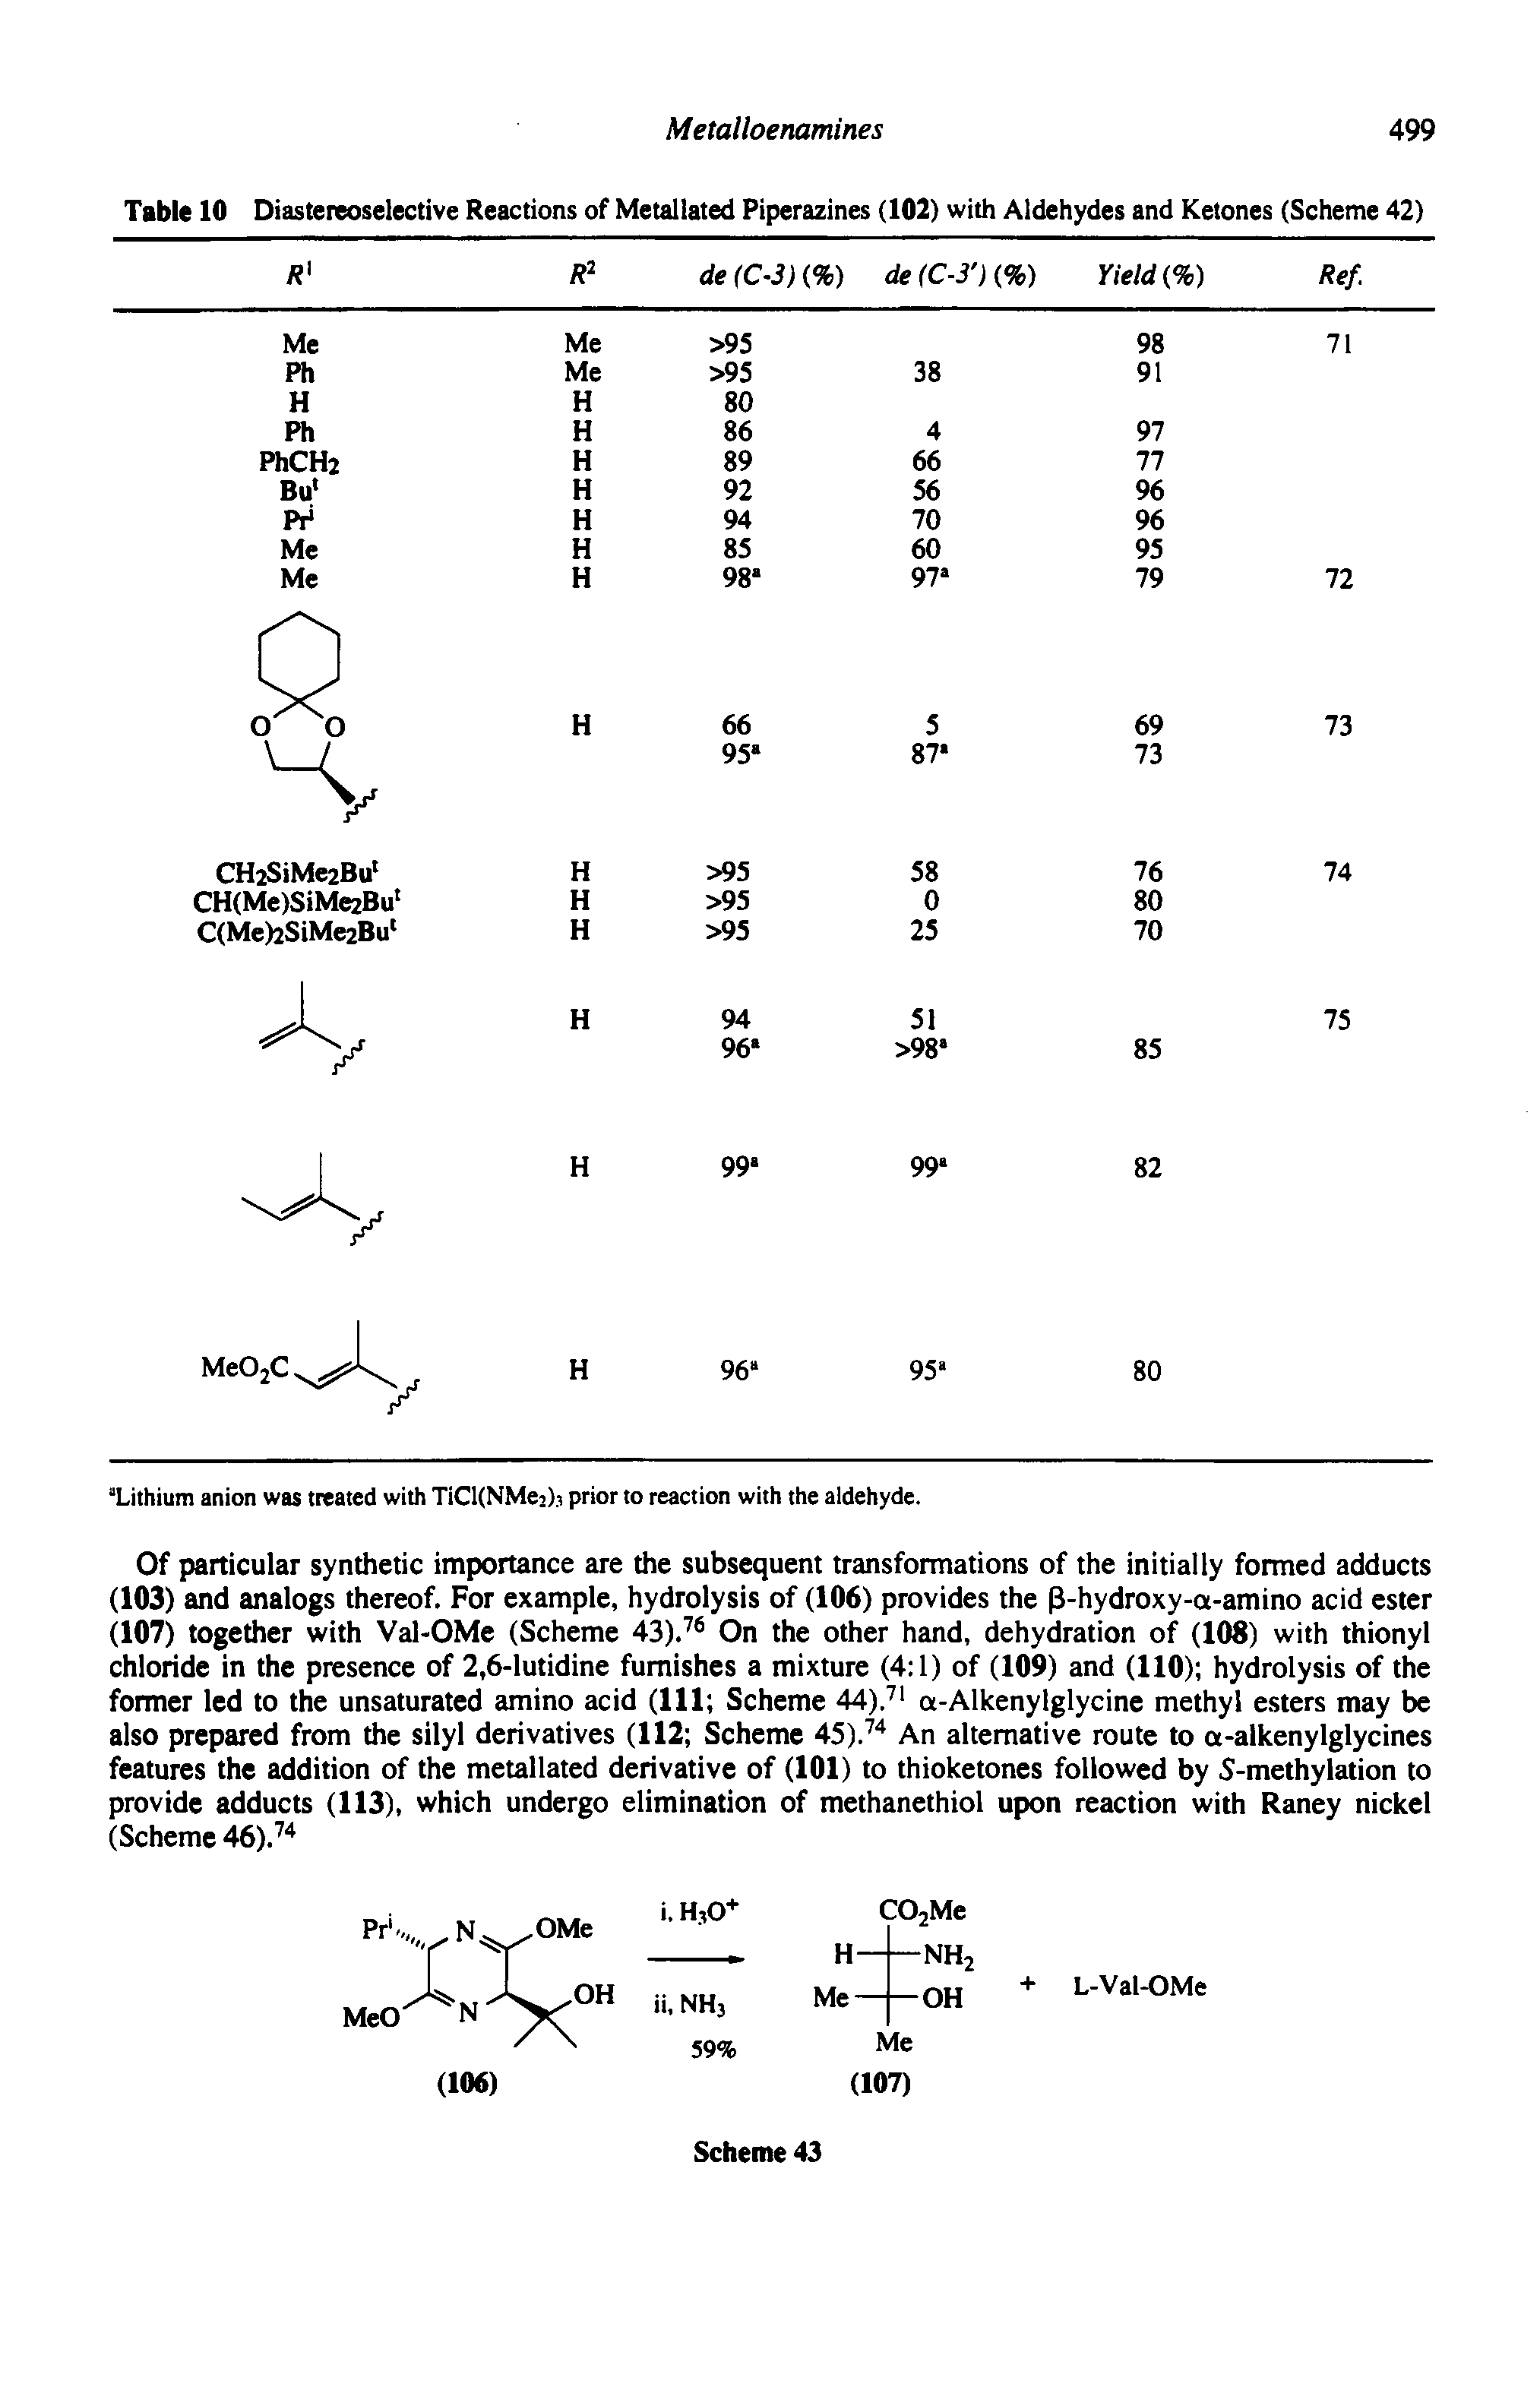 Table 10 Diastereoselective Reactions of Metallated Piperazines (102) with Aldehydes and Ketones (Scheme 42)...